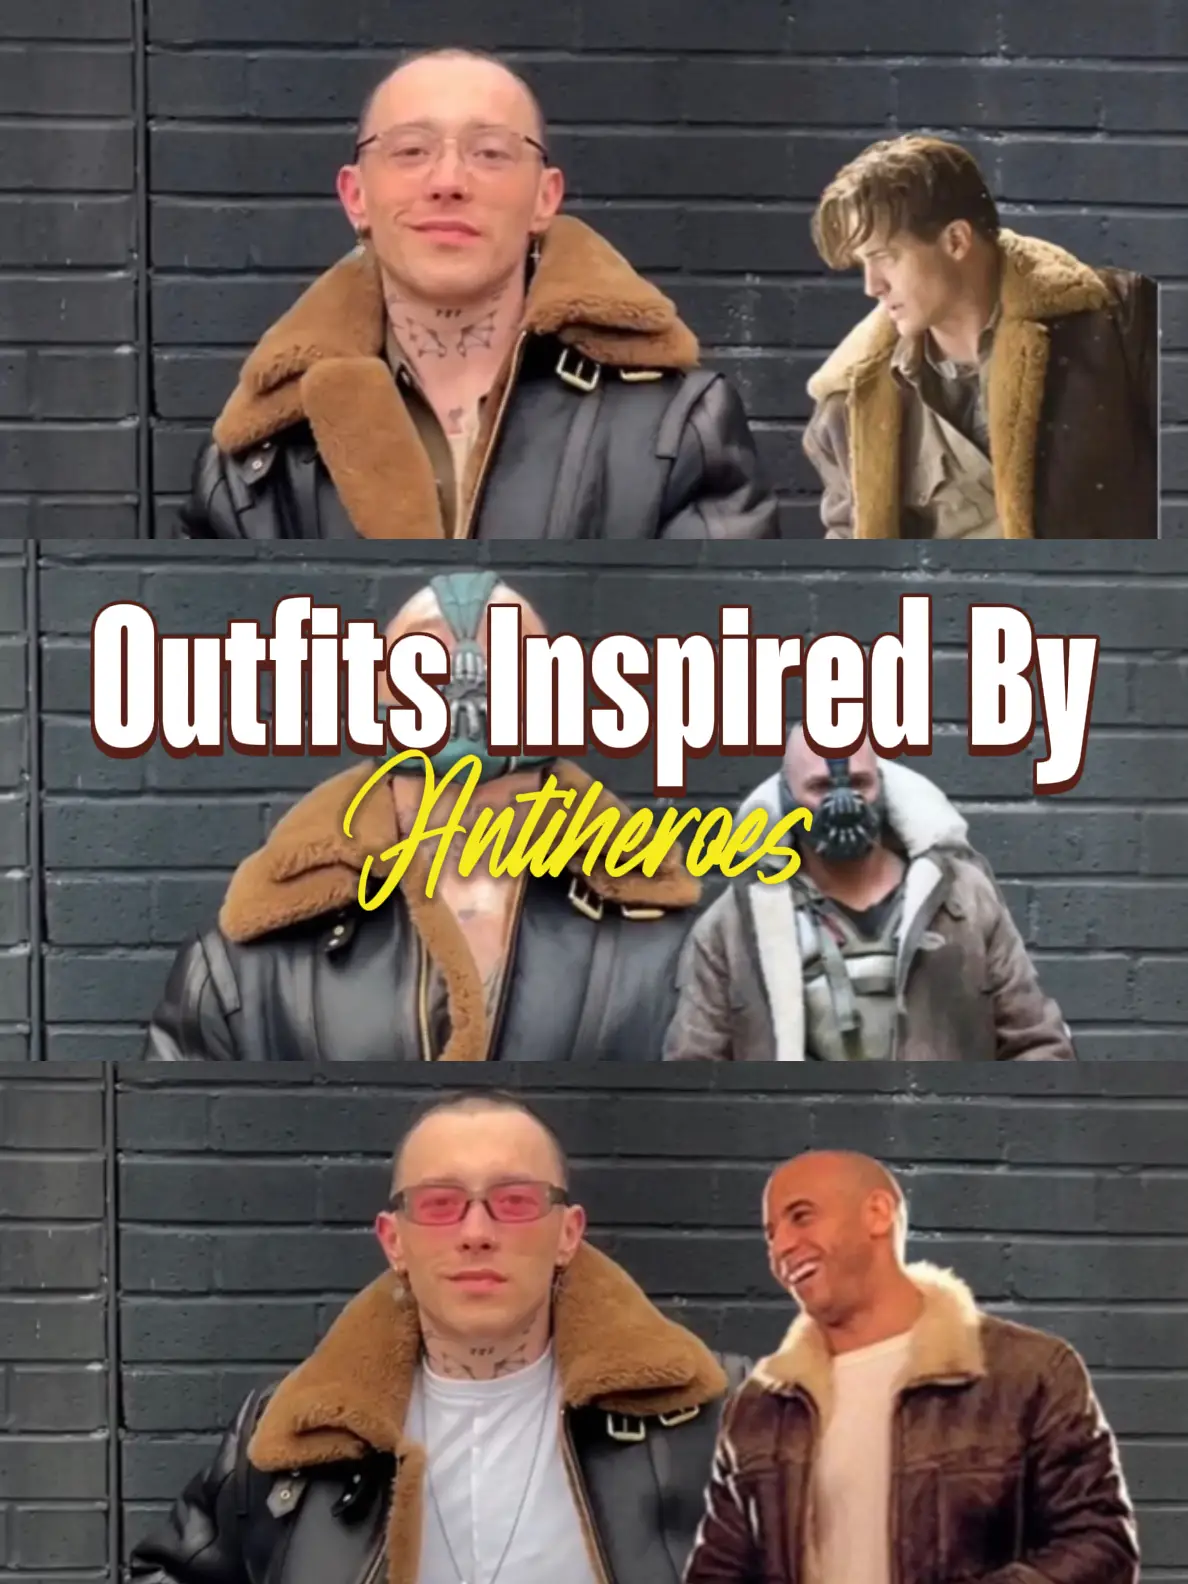 Lemon8 Dont Be posted by JACKET inspired | by SAME Gallery | THE Outfits Mike